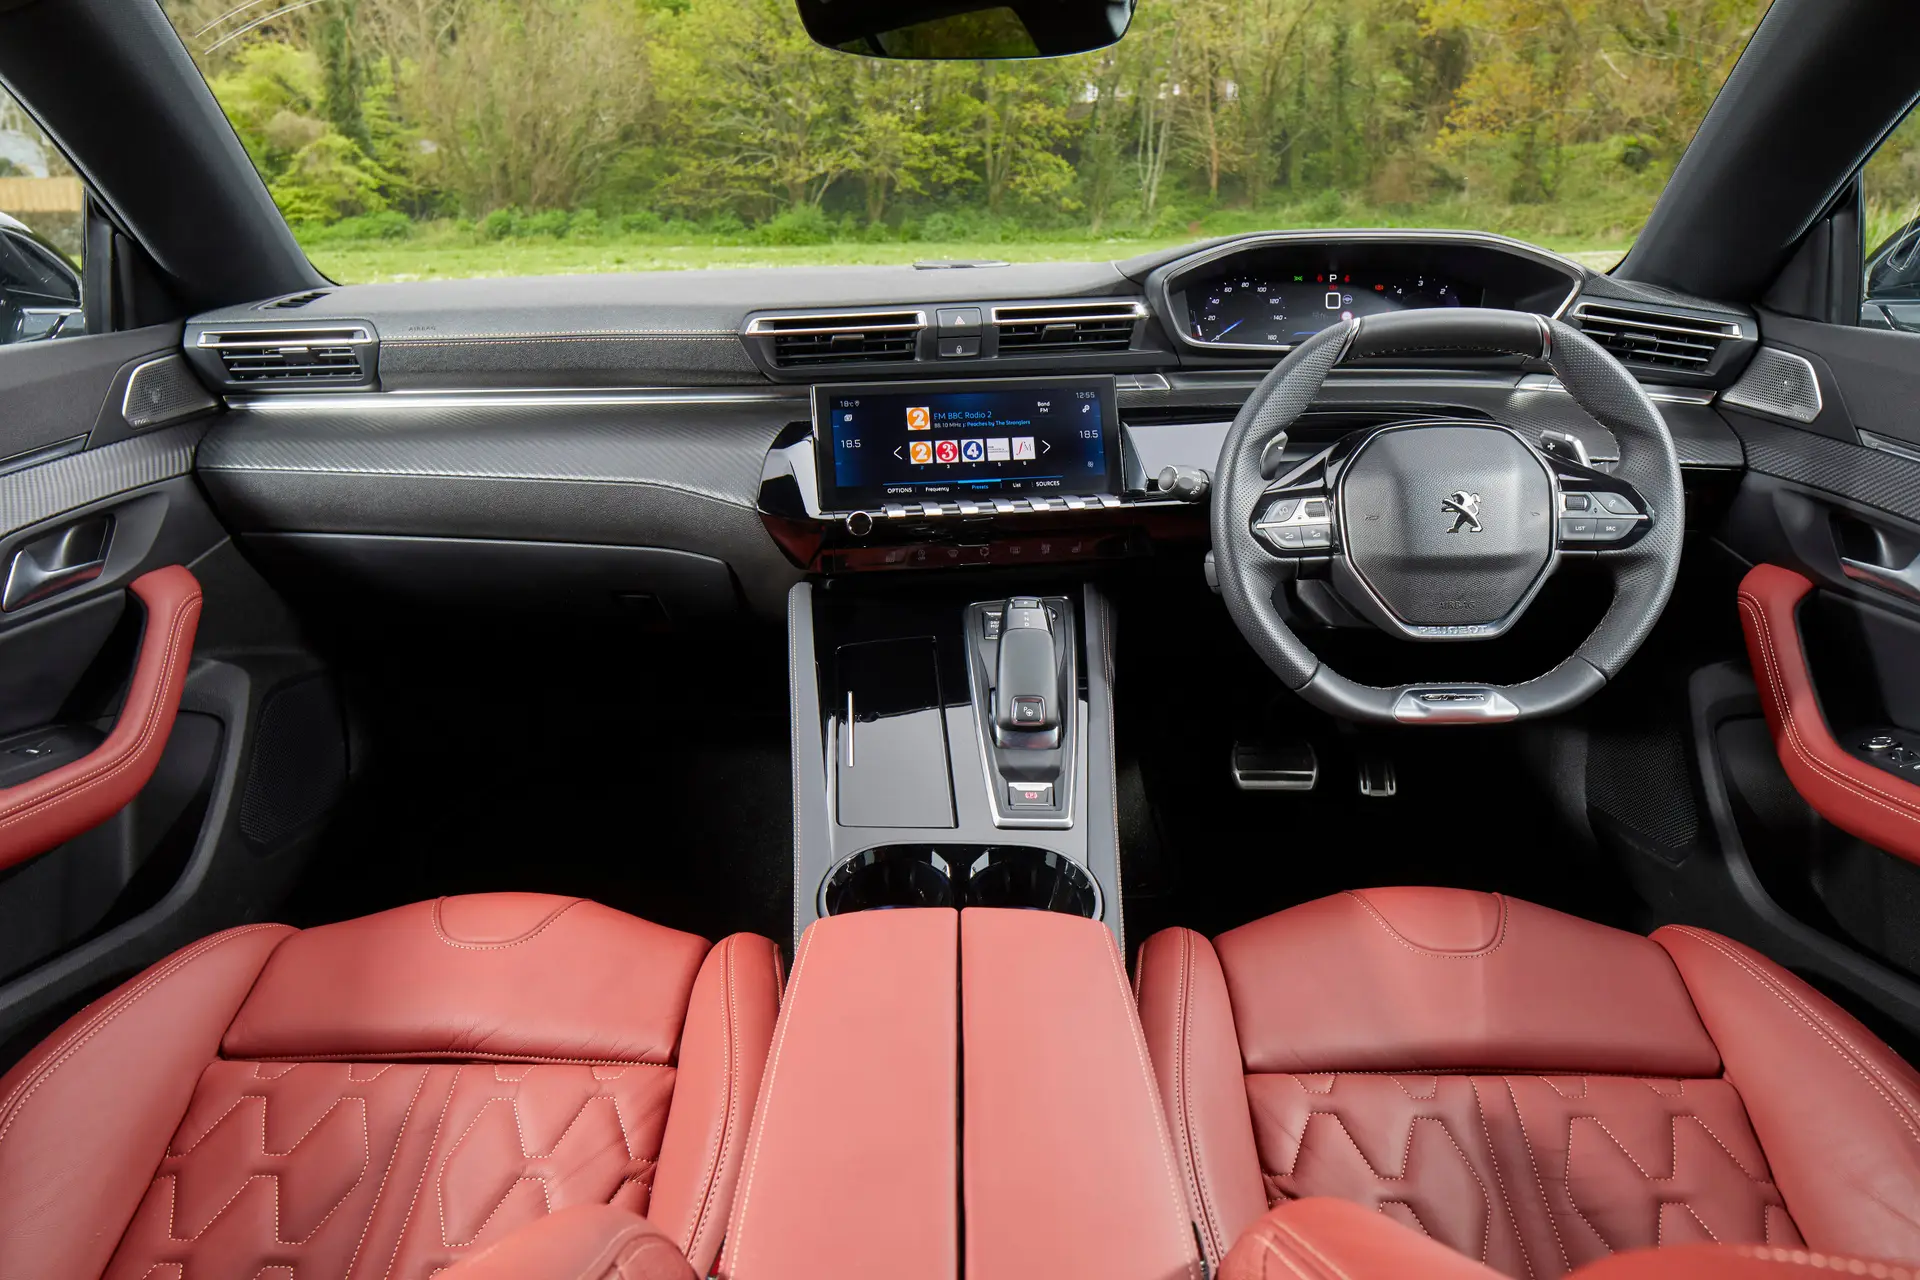 Peugeot 508 SW Review 2023: Interior close up photo of the Peugeot 508 SW dashboard